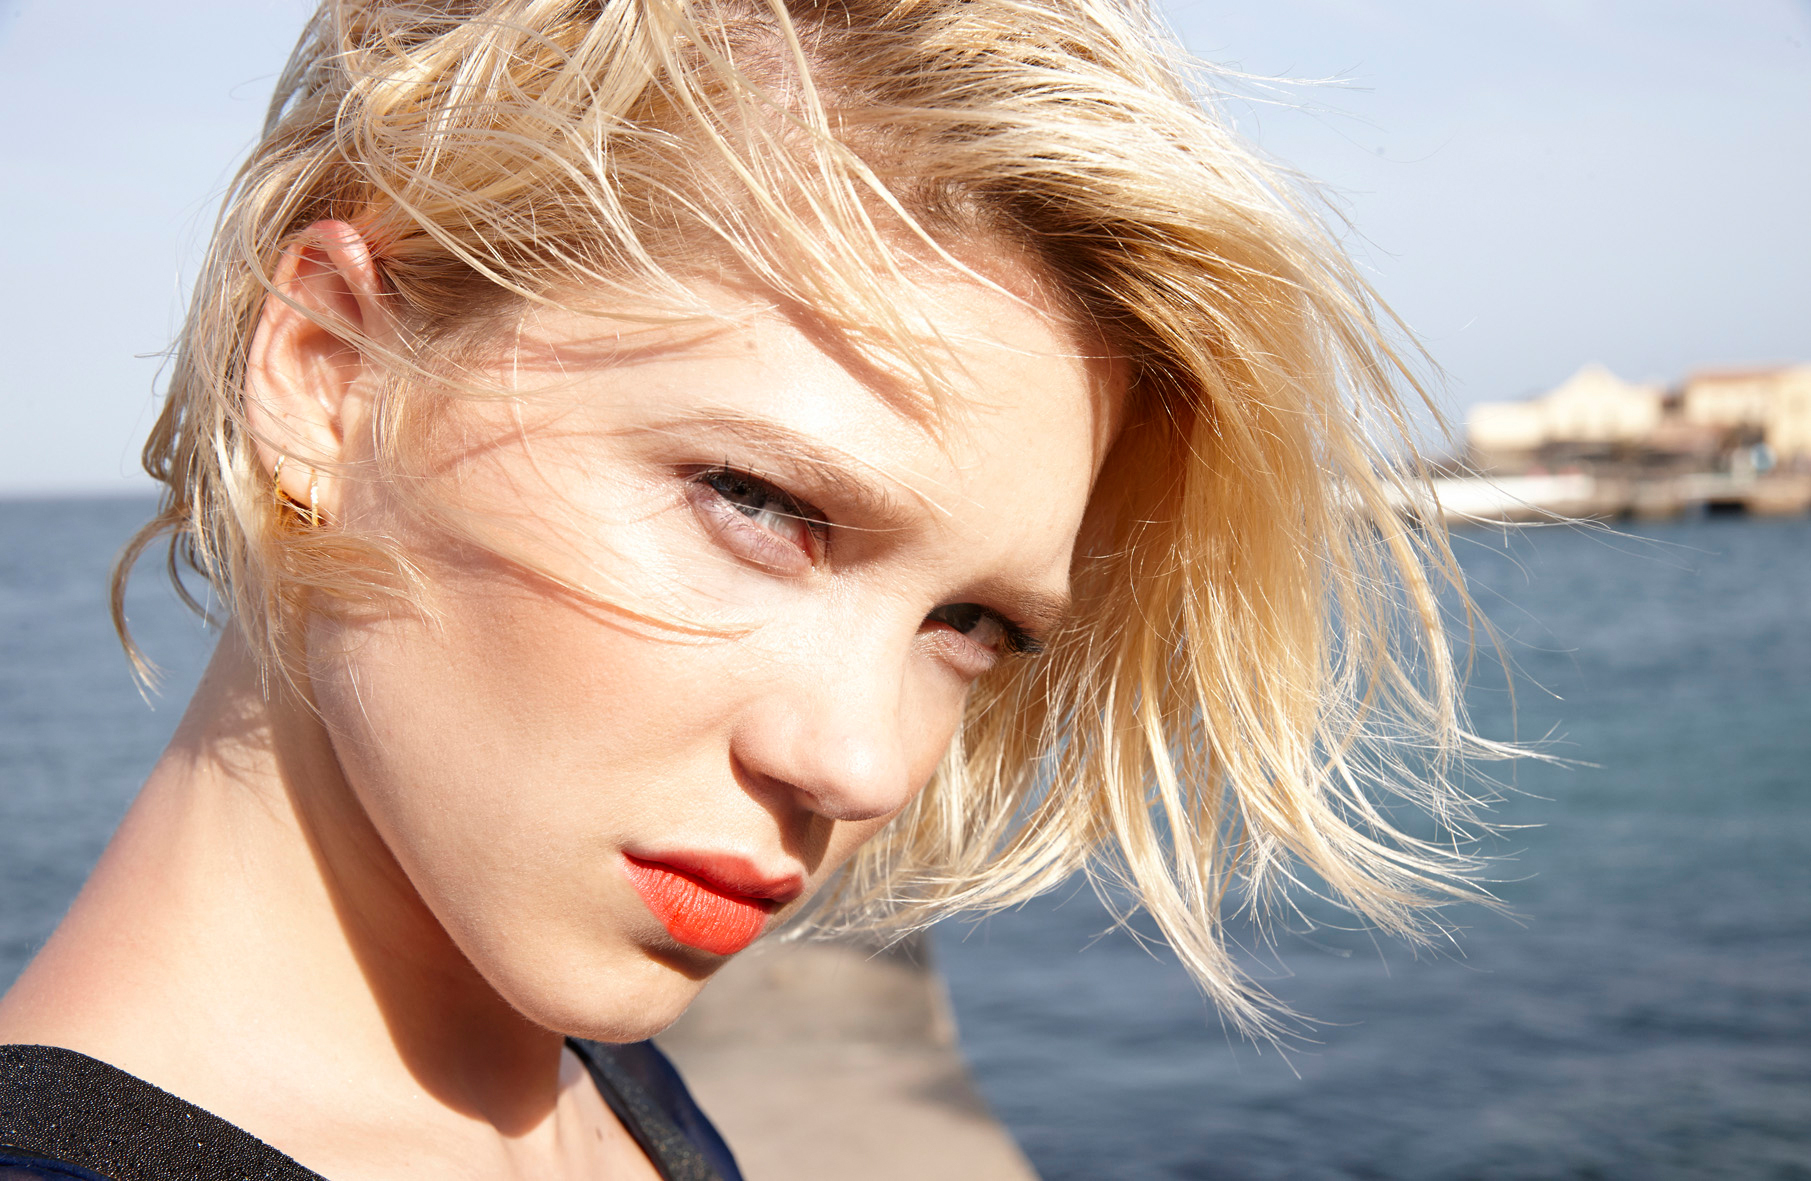 People 1811x1181 actress women French actress Léa Seydoux French women face closeup windy red lipstick model looking at viewer women outdoors